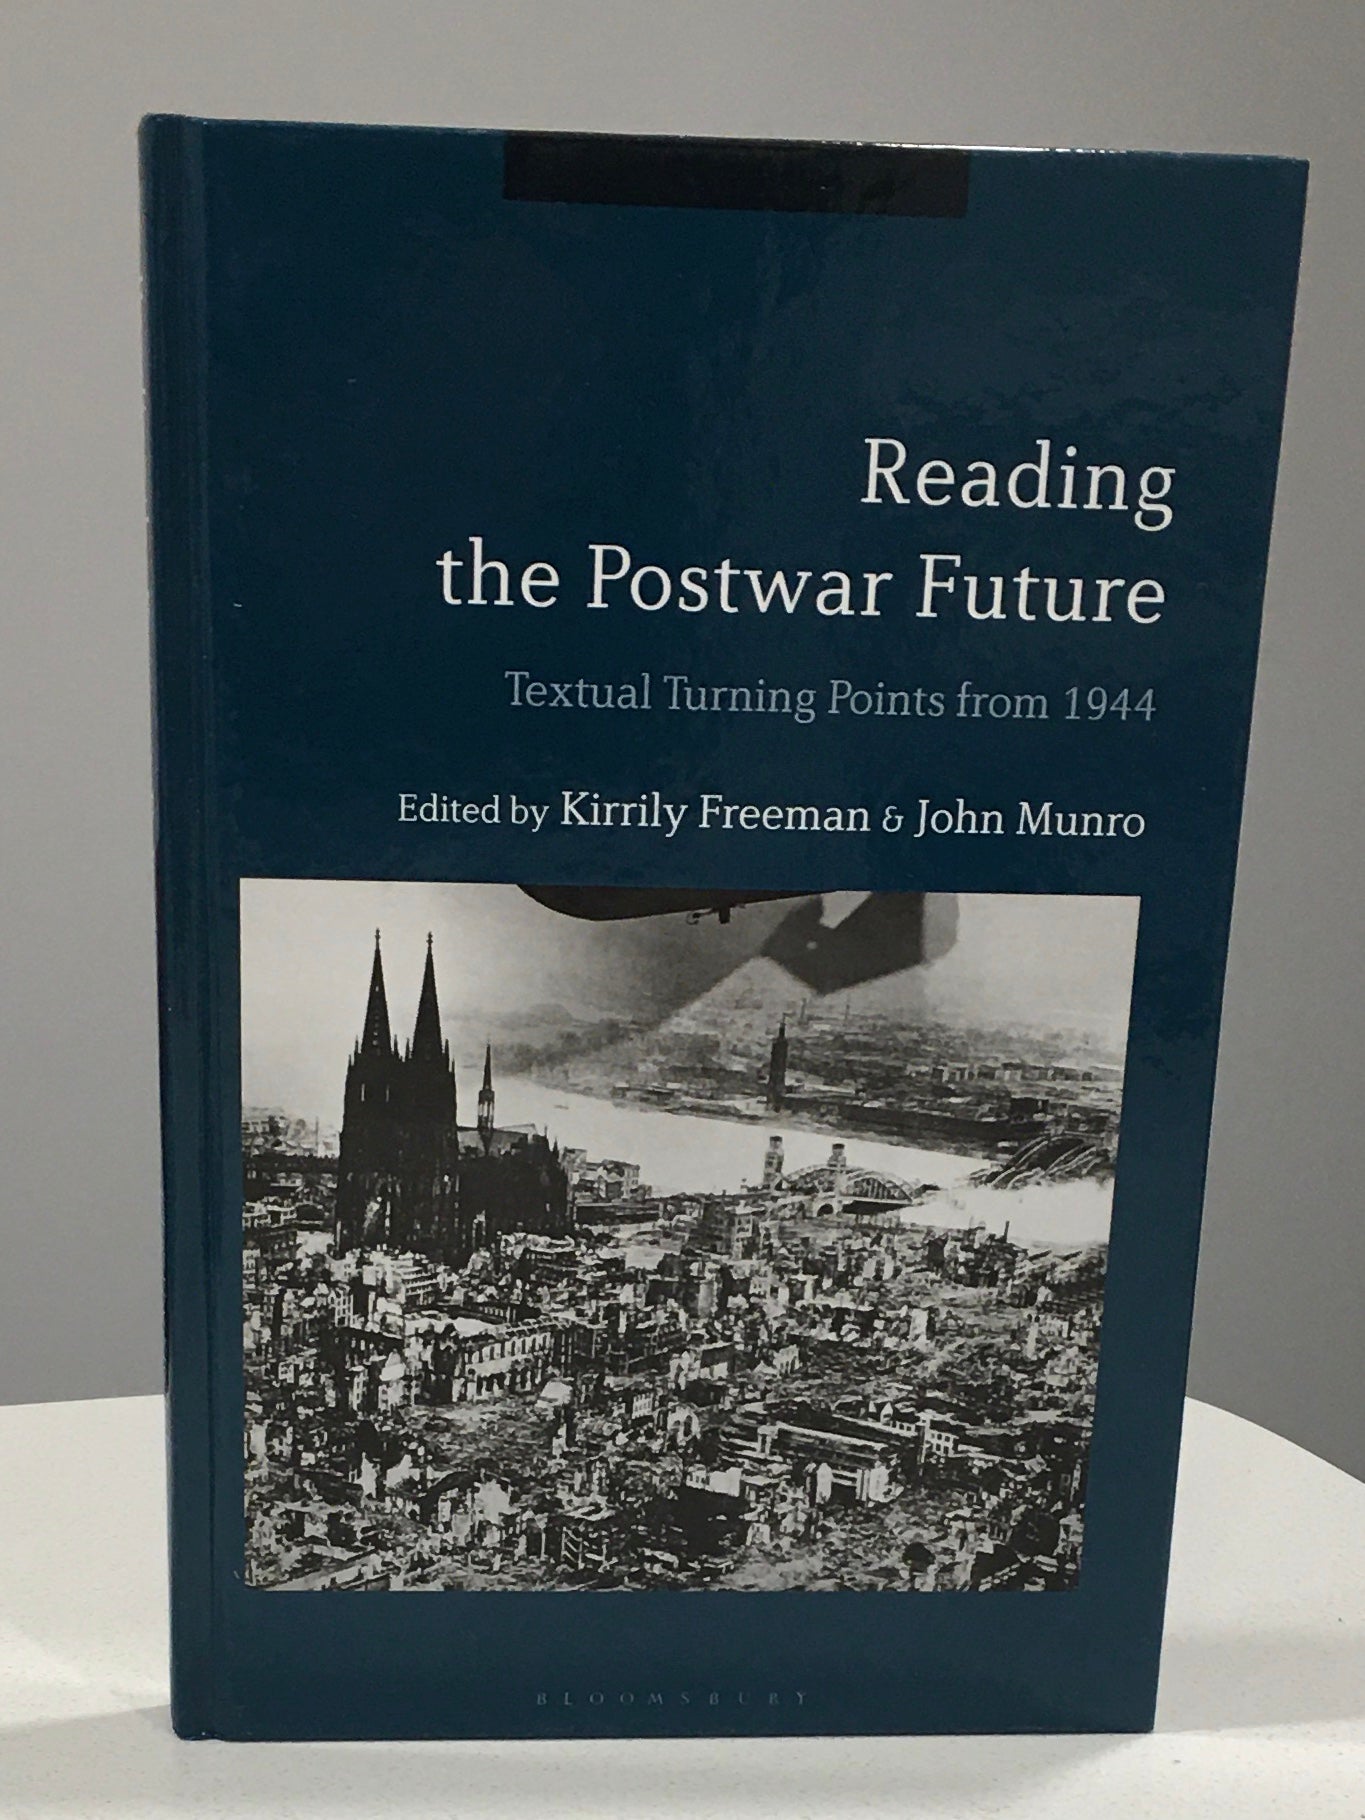 Reading the Postwar Future Textual Turning Points from 1944